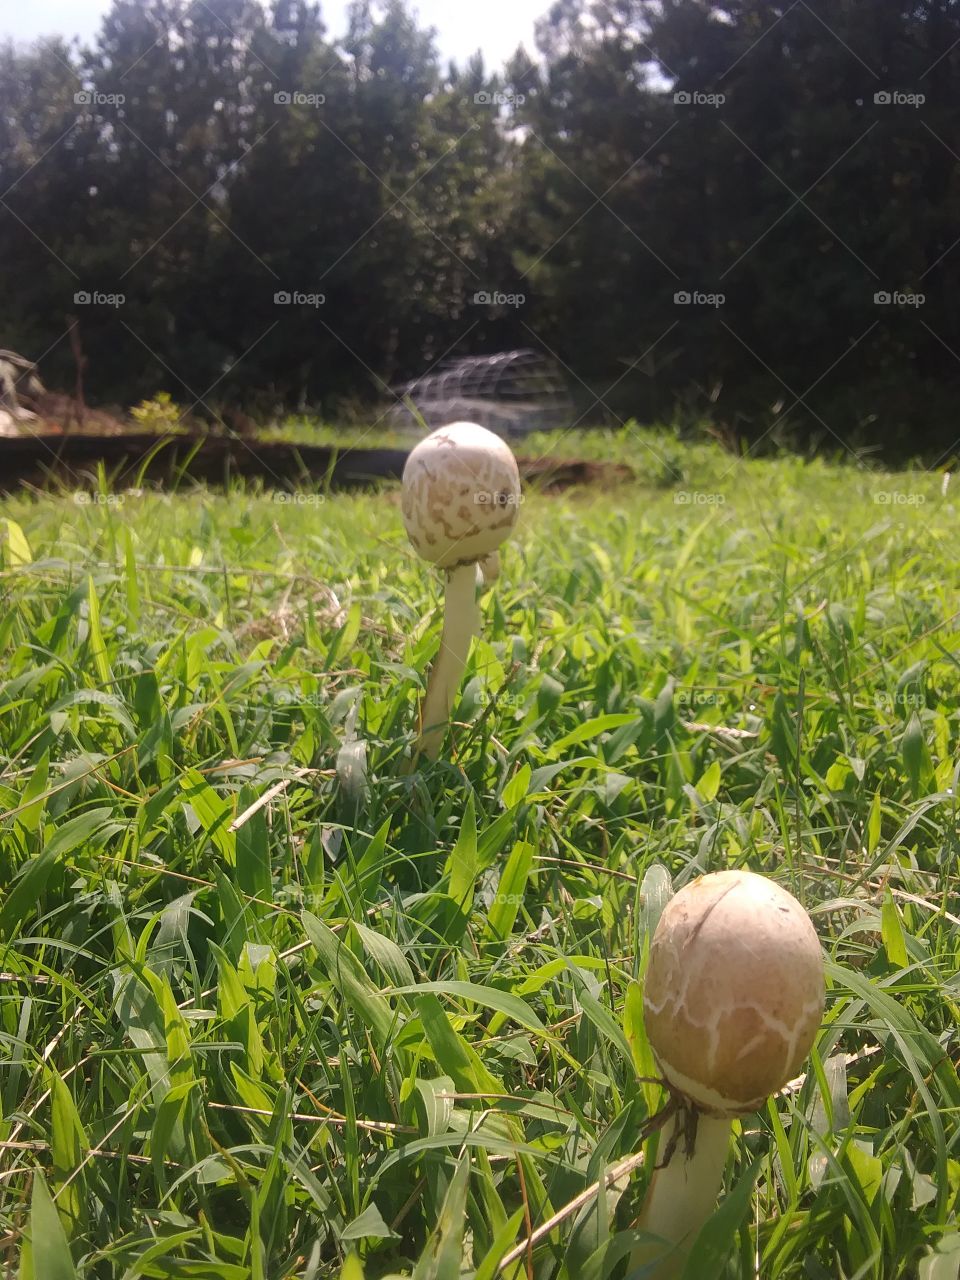 about to bloom shroom